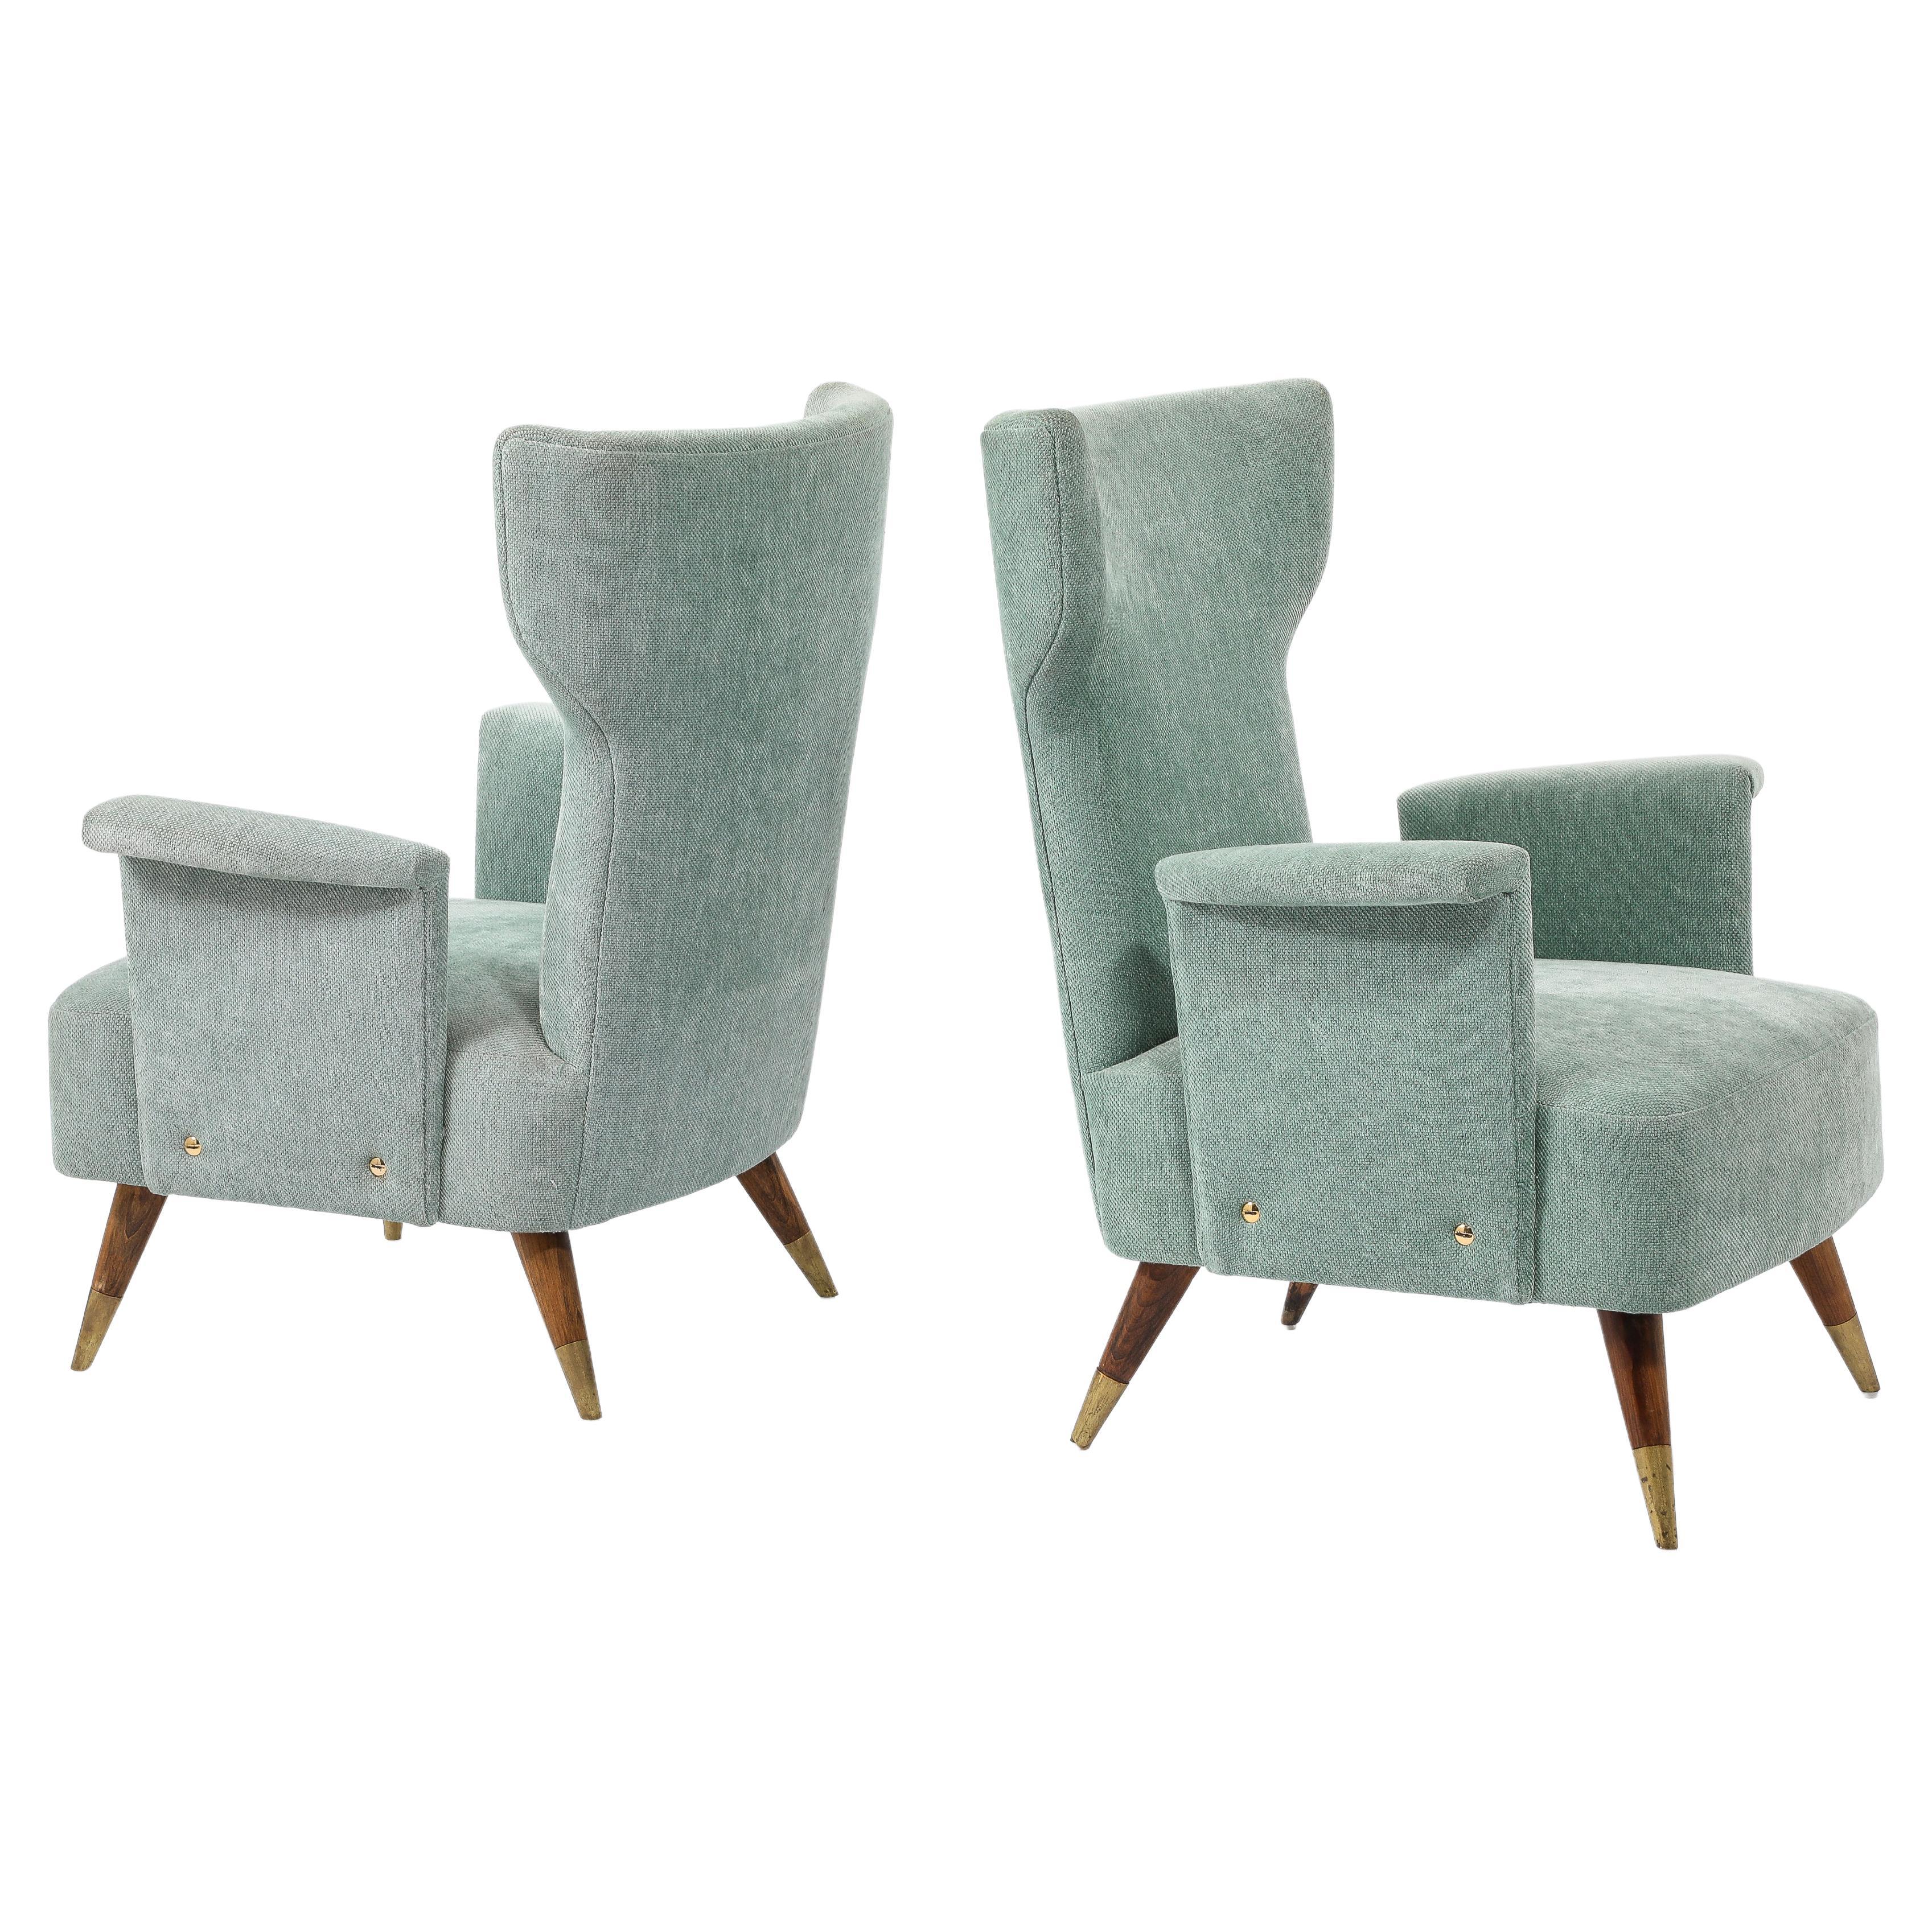 Pale Blue Tall Italian Wingchairs, Italy 1950's For Sale